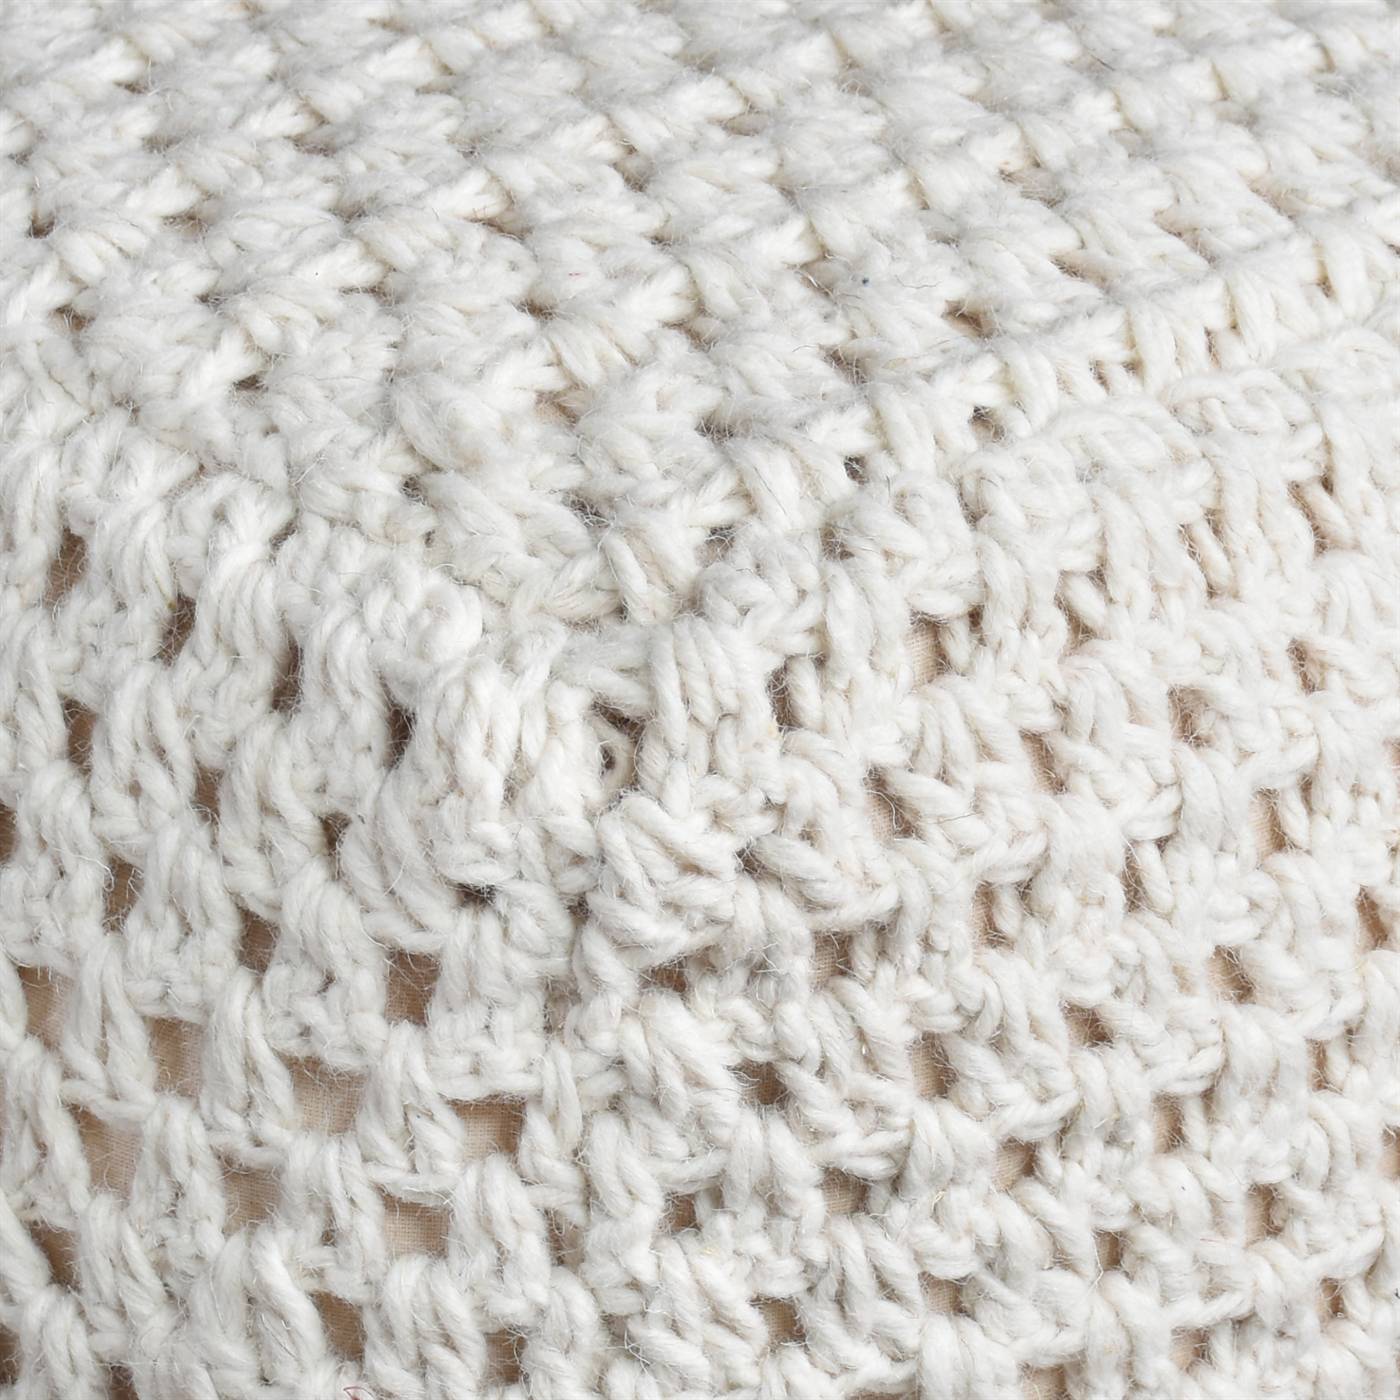 Talcott Pouf, 40x40x40 cm, Natural White, Wool, Hand Knitted, Hm Knitted, Flat Weave